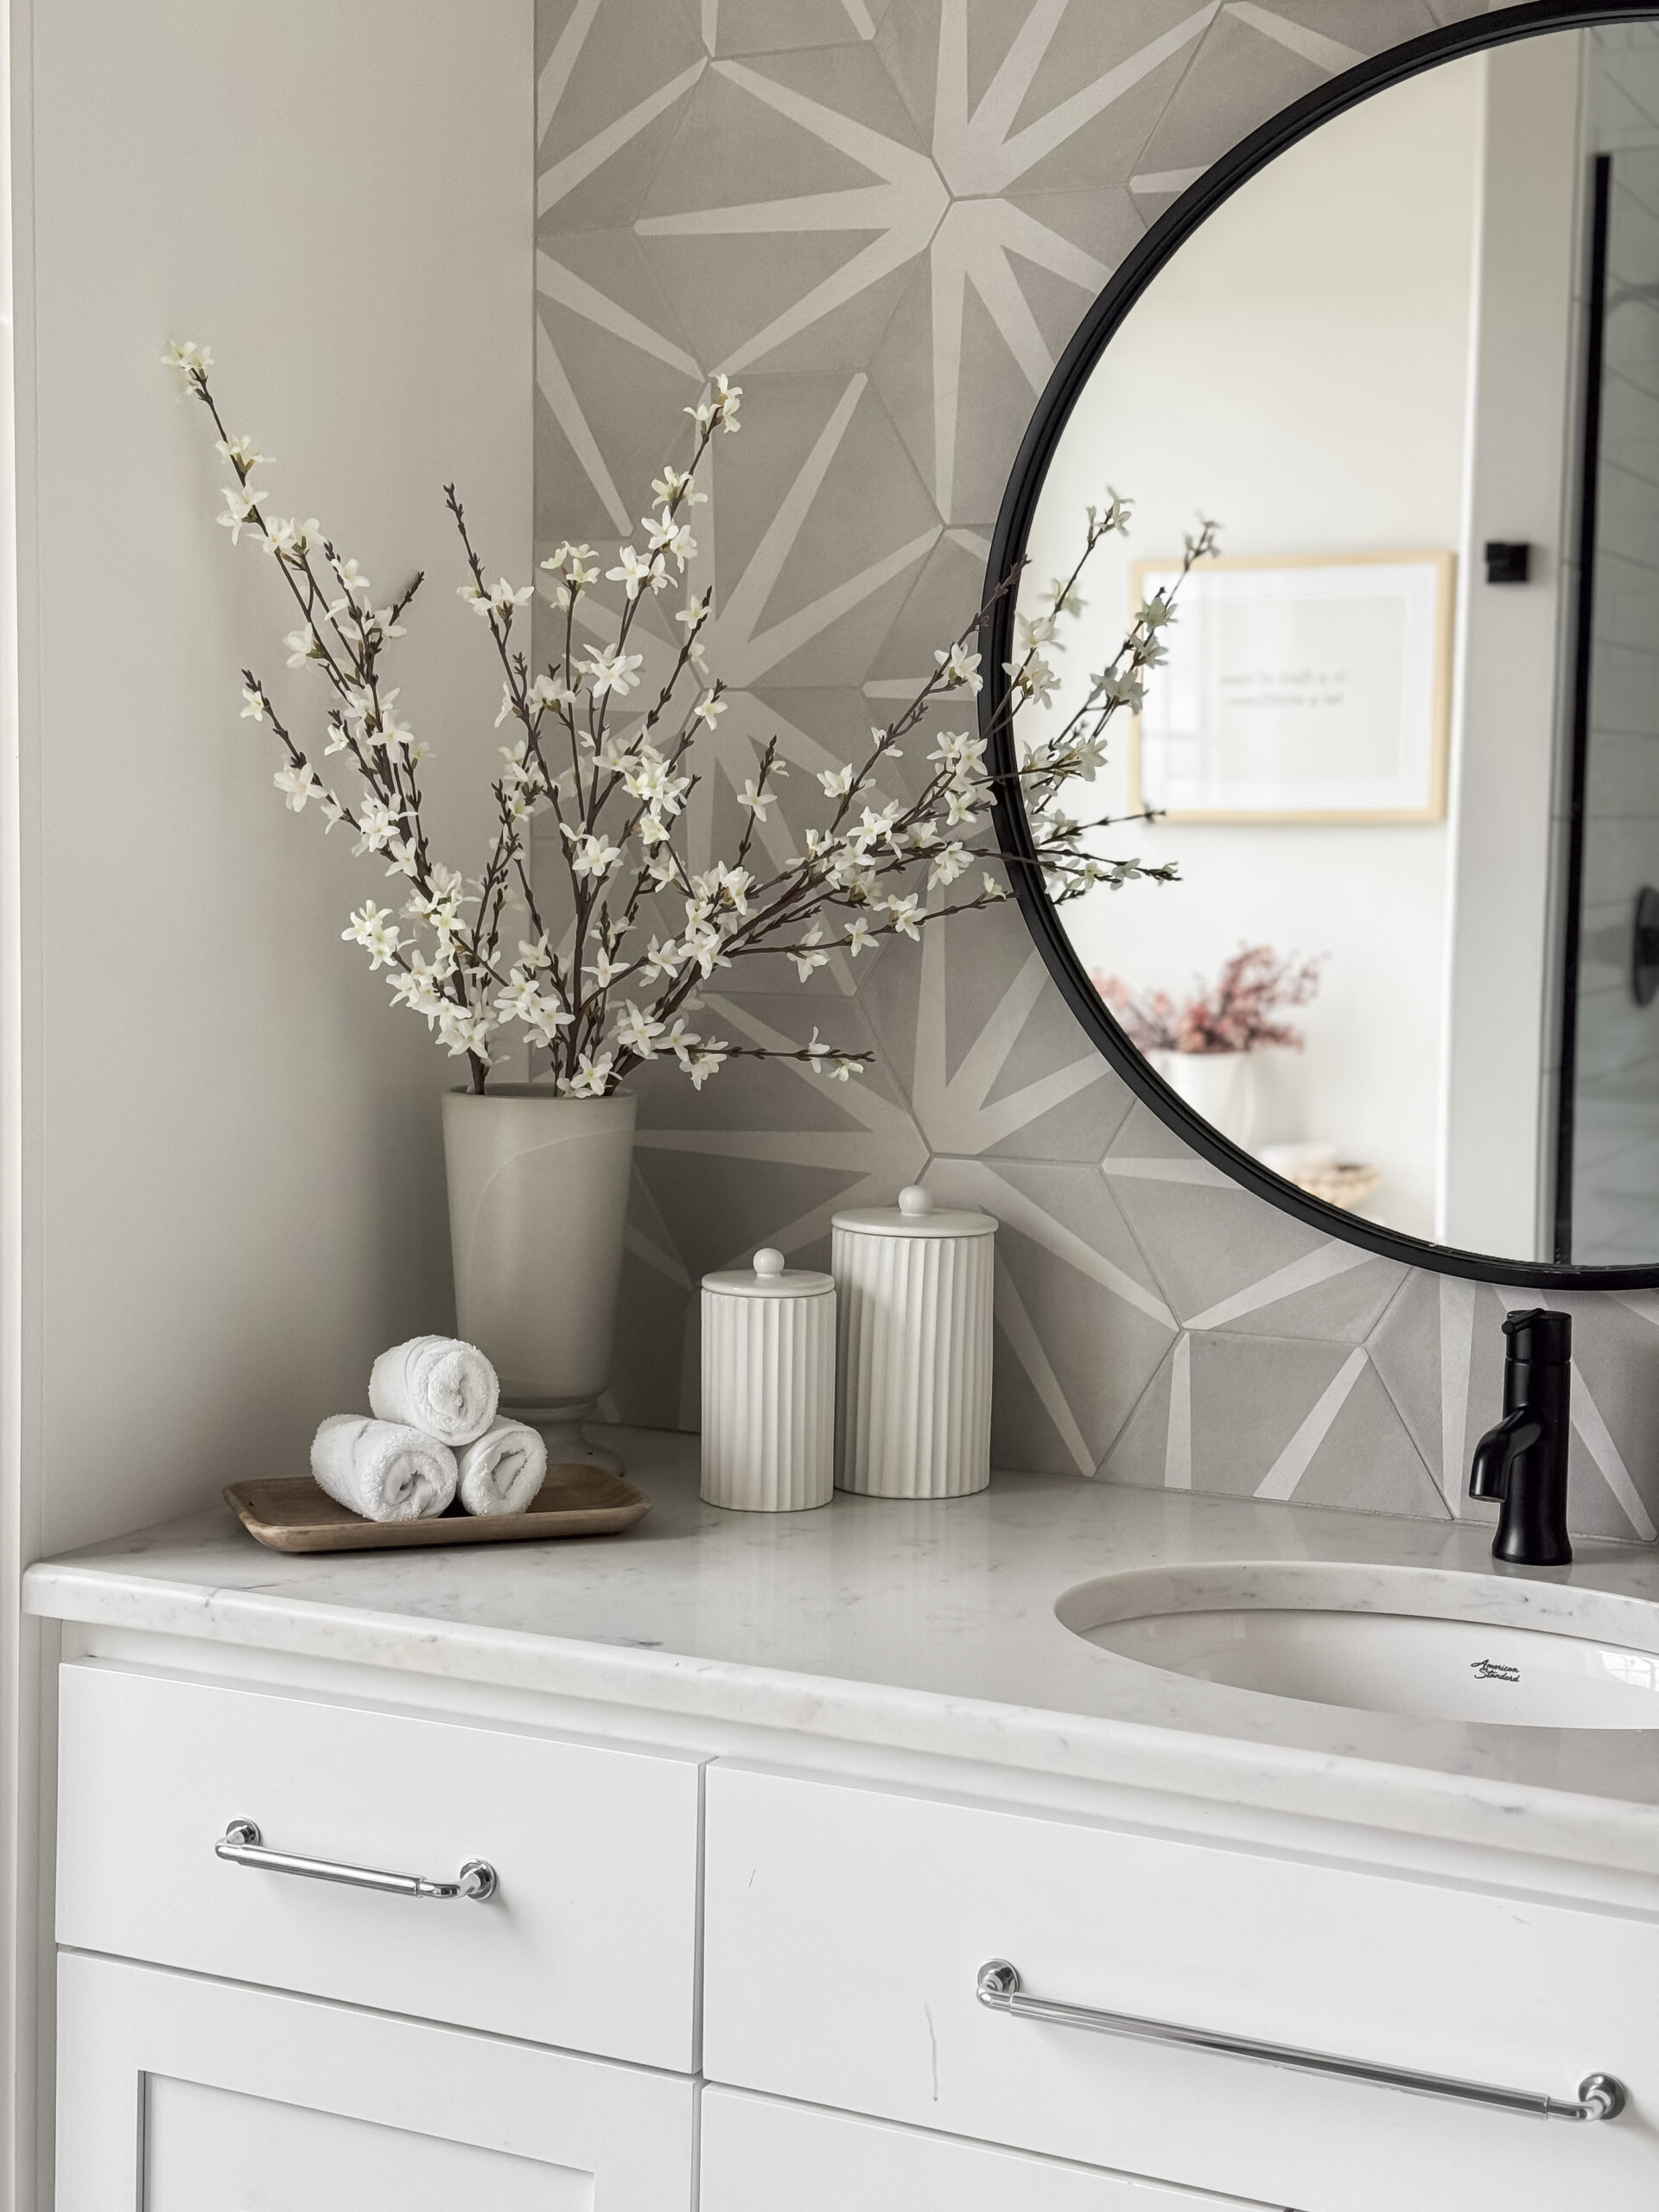 brighten up your home with spring stems | home, home decor, spring, spring stems, spring decor, spring home decor, neutral, wall mirror, canisters, white, wooden, accent wall, blossom branch